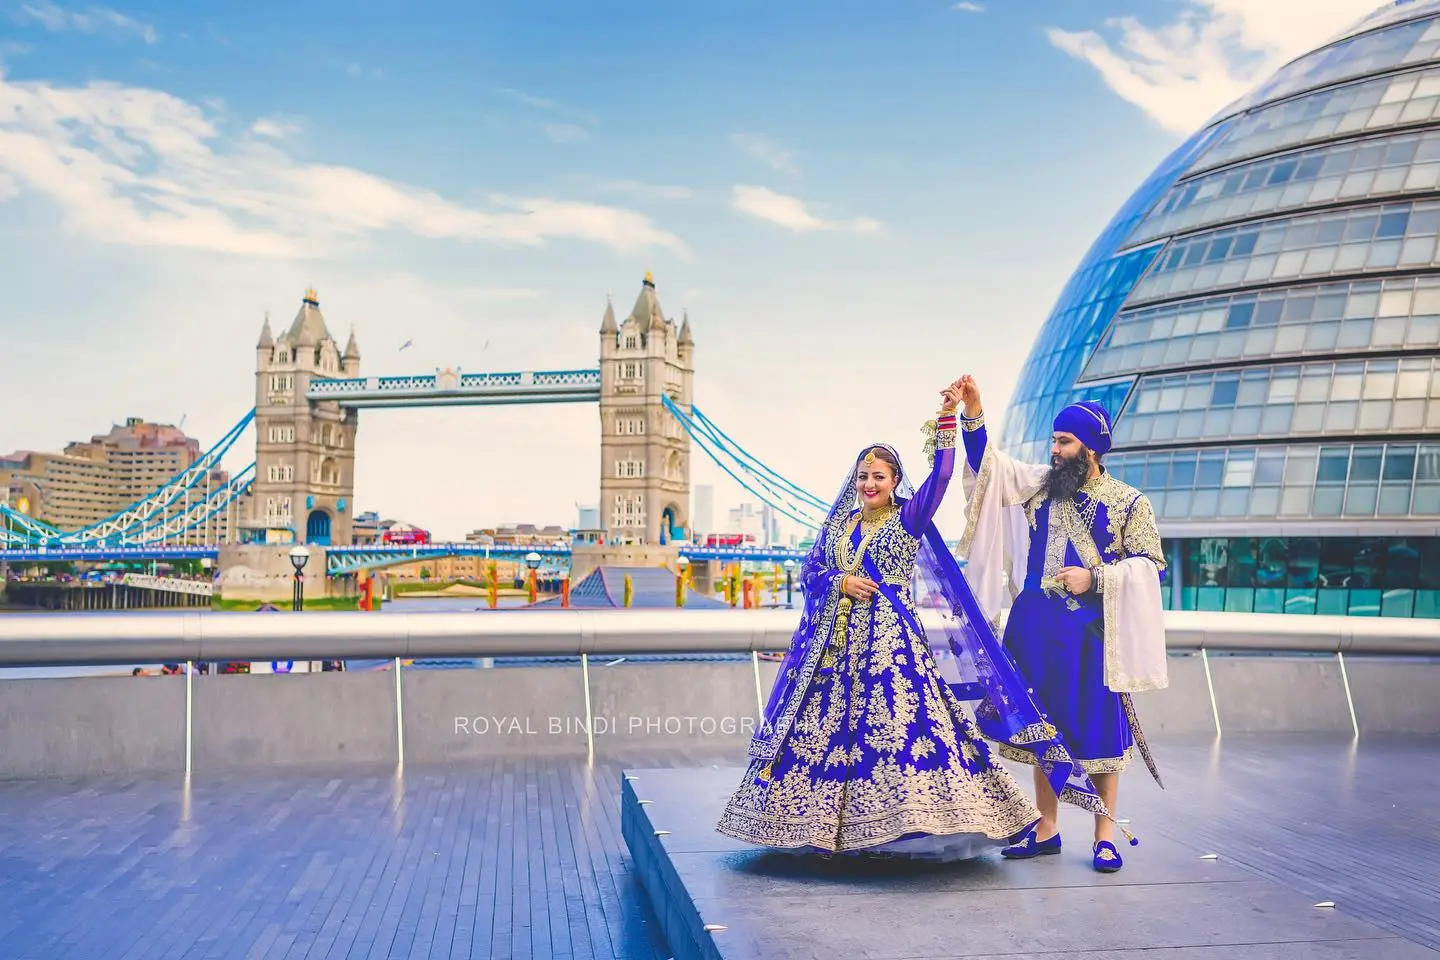 Asian Wedding Photography and Videography Central London